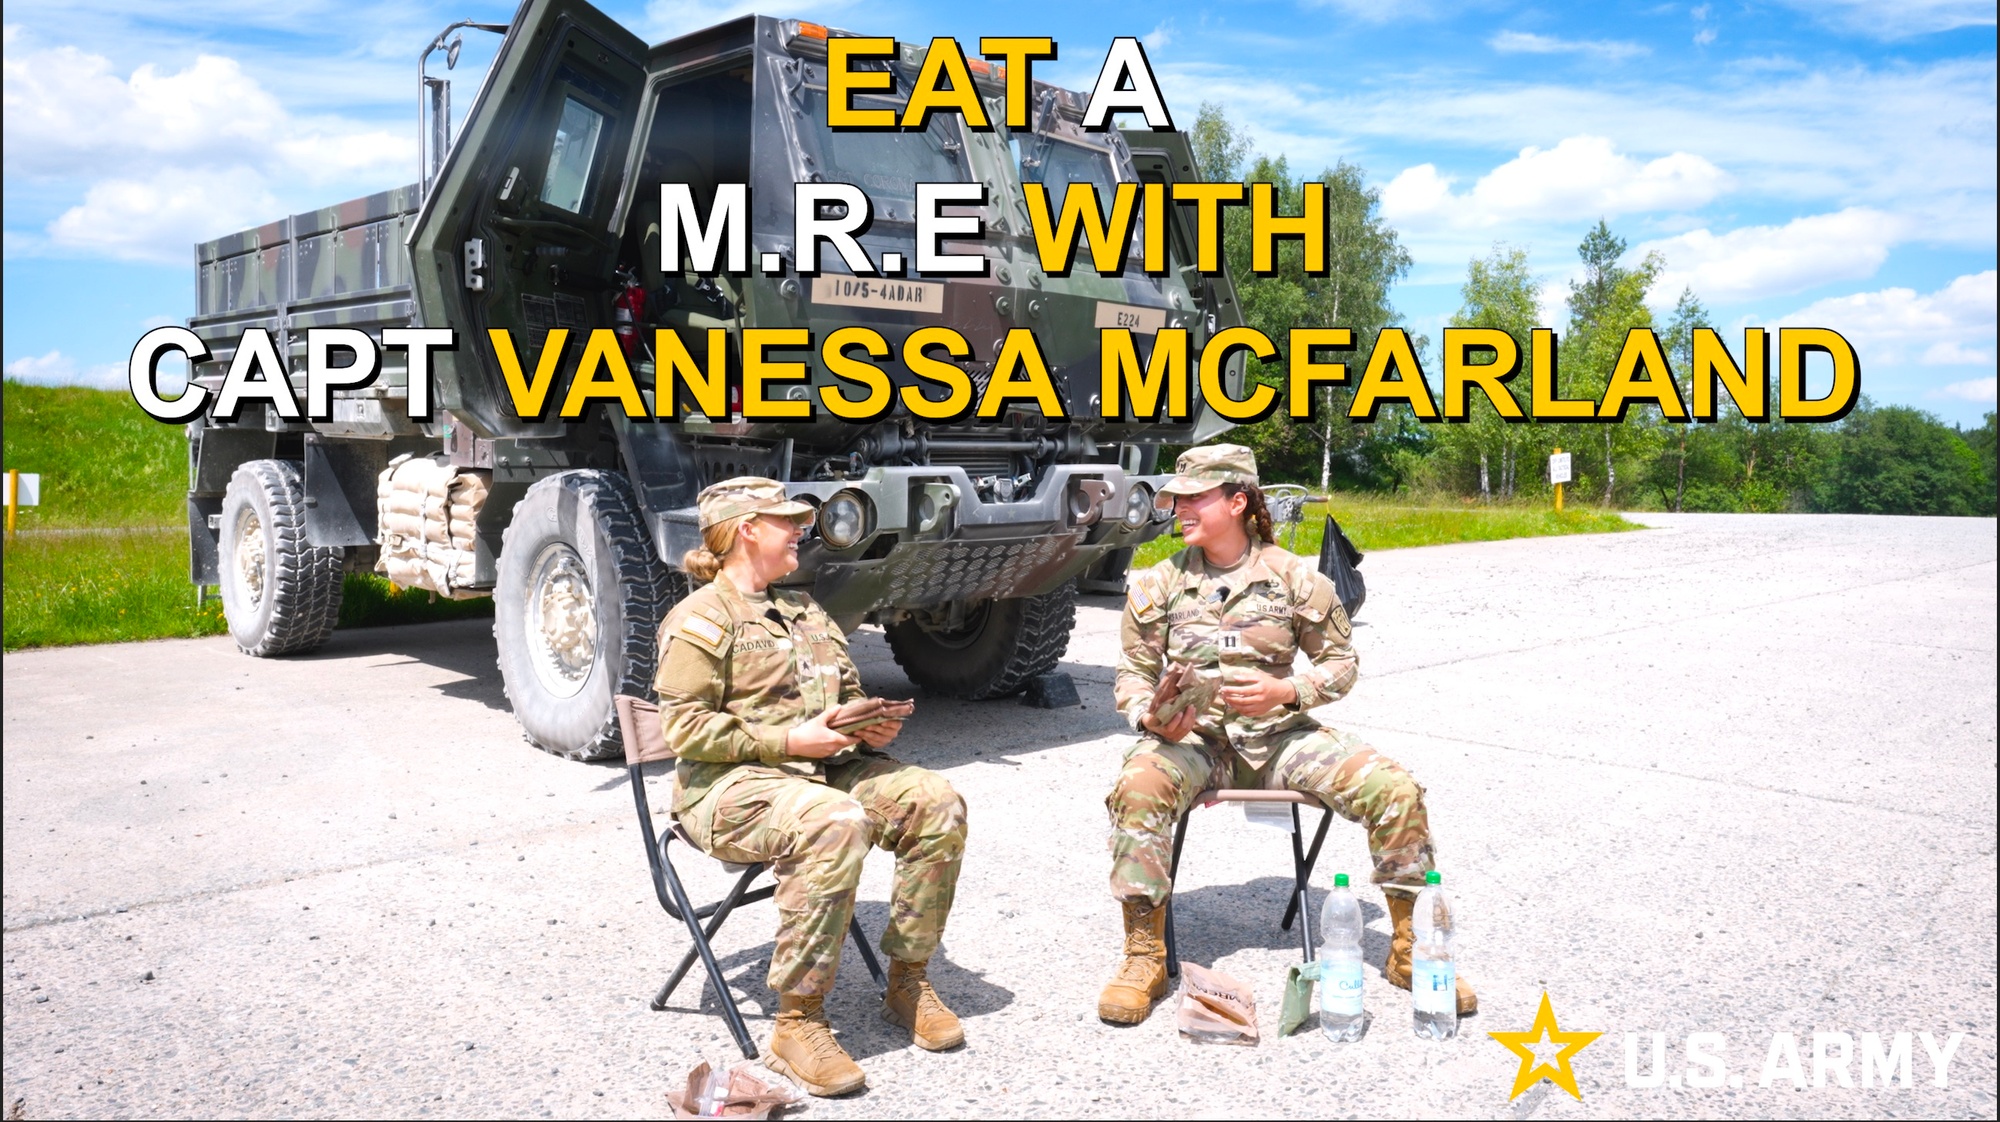 U.S. Army Capt. Vanessa McFarland, Echo Battery, 5th Battalion, 4th Air Defense Artillery Commander, and Sgt. Yesenia Cadavid, 10th AAMDC Public Affairs NCOIC, eats an M.R.E while answering questions June 9 during a convoy live fire exercise in Grafenwöhr, Germany. This series will involve soldiers of every rank as we share meals, reflections and experiences with members of team 10 (U.S. Army video by Sgt. Yesenia Cadavid)